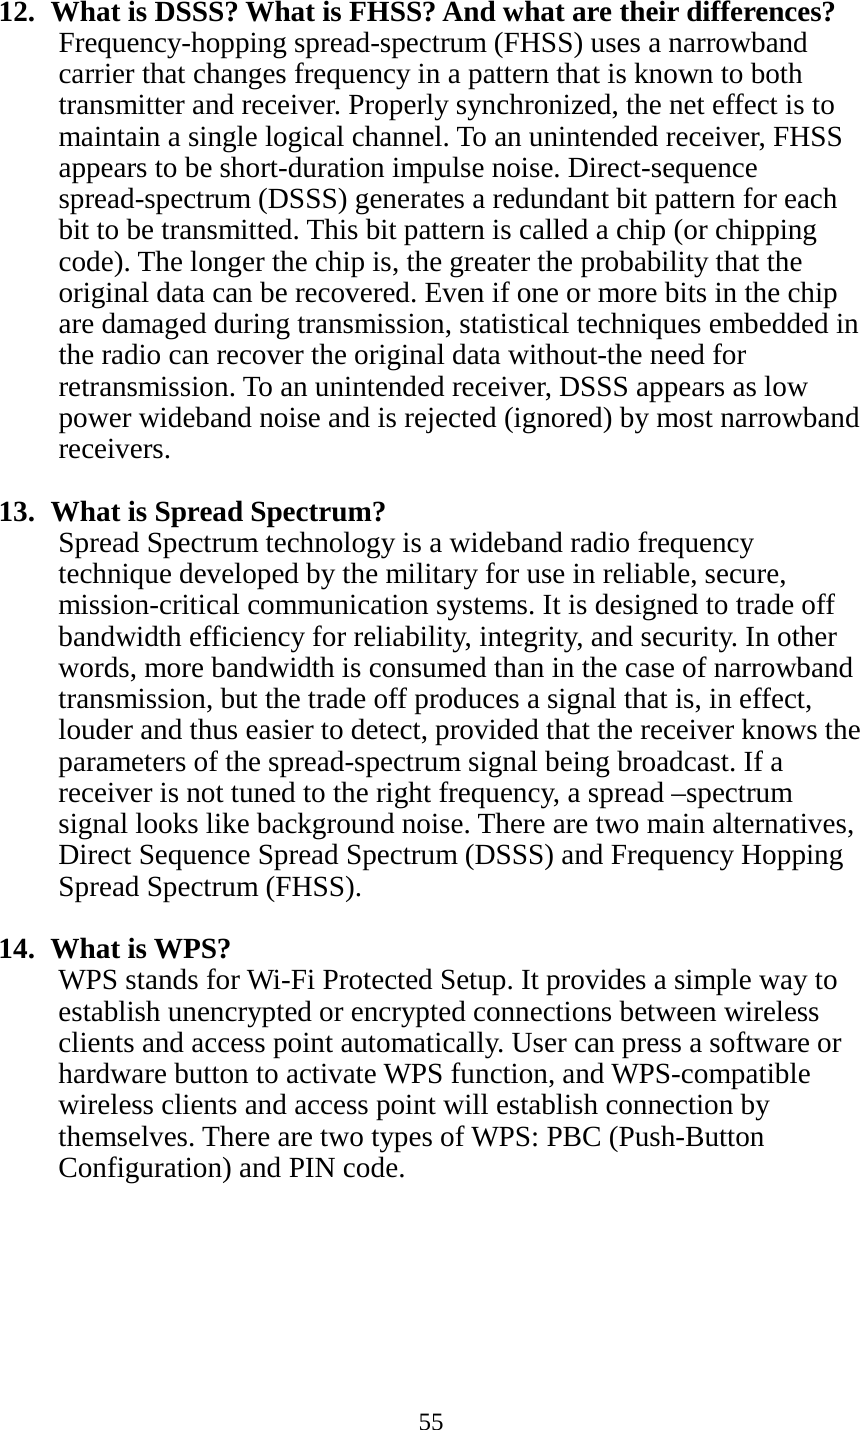 55   12.  What is DSSS? What is FHSS? And what are their differences? Frequency-hopping spread-spectrum (FHSS) uses a narrowband carrier that changes frequency in a pattern that is known to both transmitter and receiver. Properly synchronized, the net effect is to maintain a single logical channel. To an unintended receiver, FHSS appears to be short-duration impulse noise. Direct-sequence spread-spectrum (DSSS) generates a redundant bit pattern for each bit to be transmitted. This bit pattern is called a chip (or chipping code). The longer the chip is, the greater the probability that the original data can be recovered. Even if one or more bits in the chip are damaged during transmission, statistical techniques embedded in the radio can recover the original data without-the need for retransmission. To an unintended receiver, DSSS appears as low power wideband noise and is rejected (ignored) by most narrowband receivers.  13.  What is Spread Spectrum? Spread Spectrum technology is a wideband radio frequency technique developed by the military for use in reliable, secure, mission-critical communication systems. It is designed to trade off bandwidth efficiency for reliability, integrity, and security. In other words, more bandwidth is consumed than in the case of narrowband transmission, but the trade off produces a signal that is, in effect, louder and thus easier to detect, provided that the receiver knows the parameters of the spread-spectrum signal being broadcast. If a receiver is not tuned to the right frequency, a spread –spectrum signal looks like background noise. There are two main alternatives, Direct Sequence Spread Spectrum (DSSS) and Frequency Hopping Spread Spectrum (FHSS).  14.  What is WPS? WPS stands for Wi-Fi Protected Setup. It provides a simple way to establish unencrypted or encrypted connections between wireless clients and access point automatically. User can press a software or hardware button to activate WPS function, and WPS-compatible wireless clients and access point will establish connection by themselves. There are two types of WPS: PBC (Push-Button Configuration) and PIN code.  